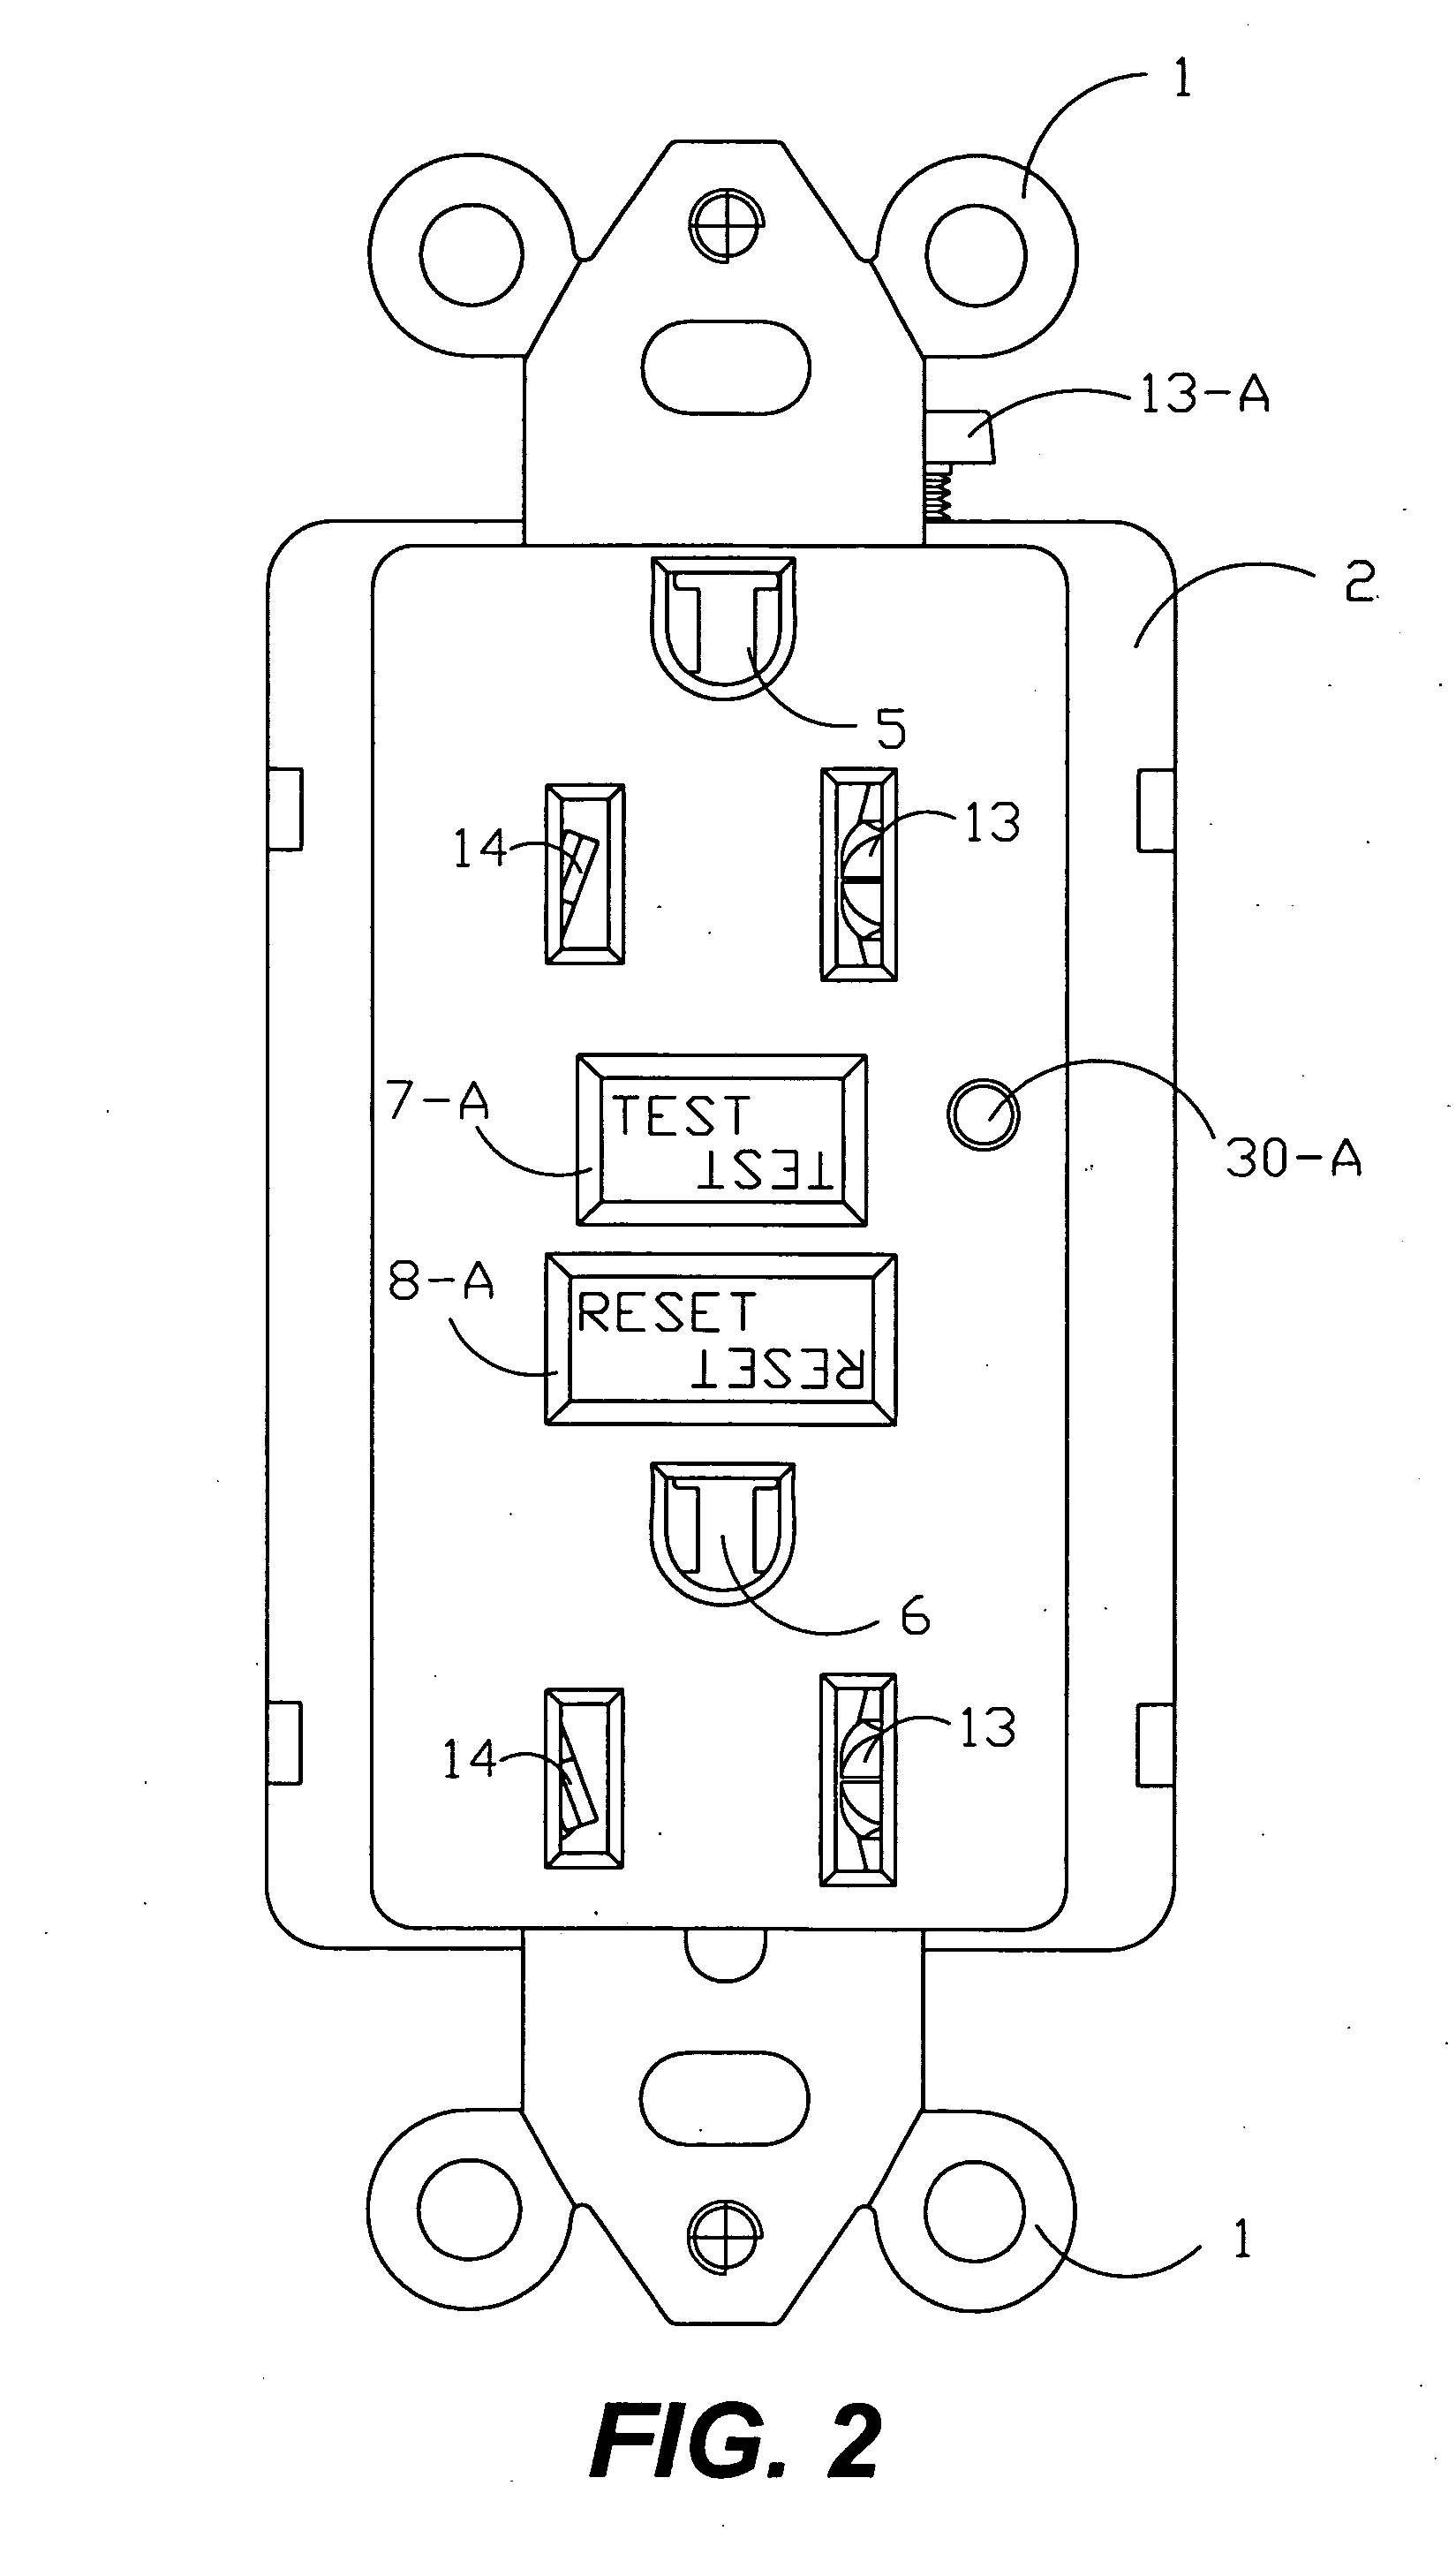 Receptacle circuit interrupting devices providing an end of life test controlled by test button